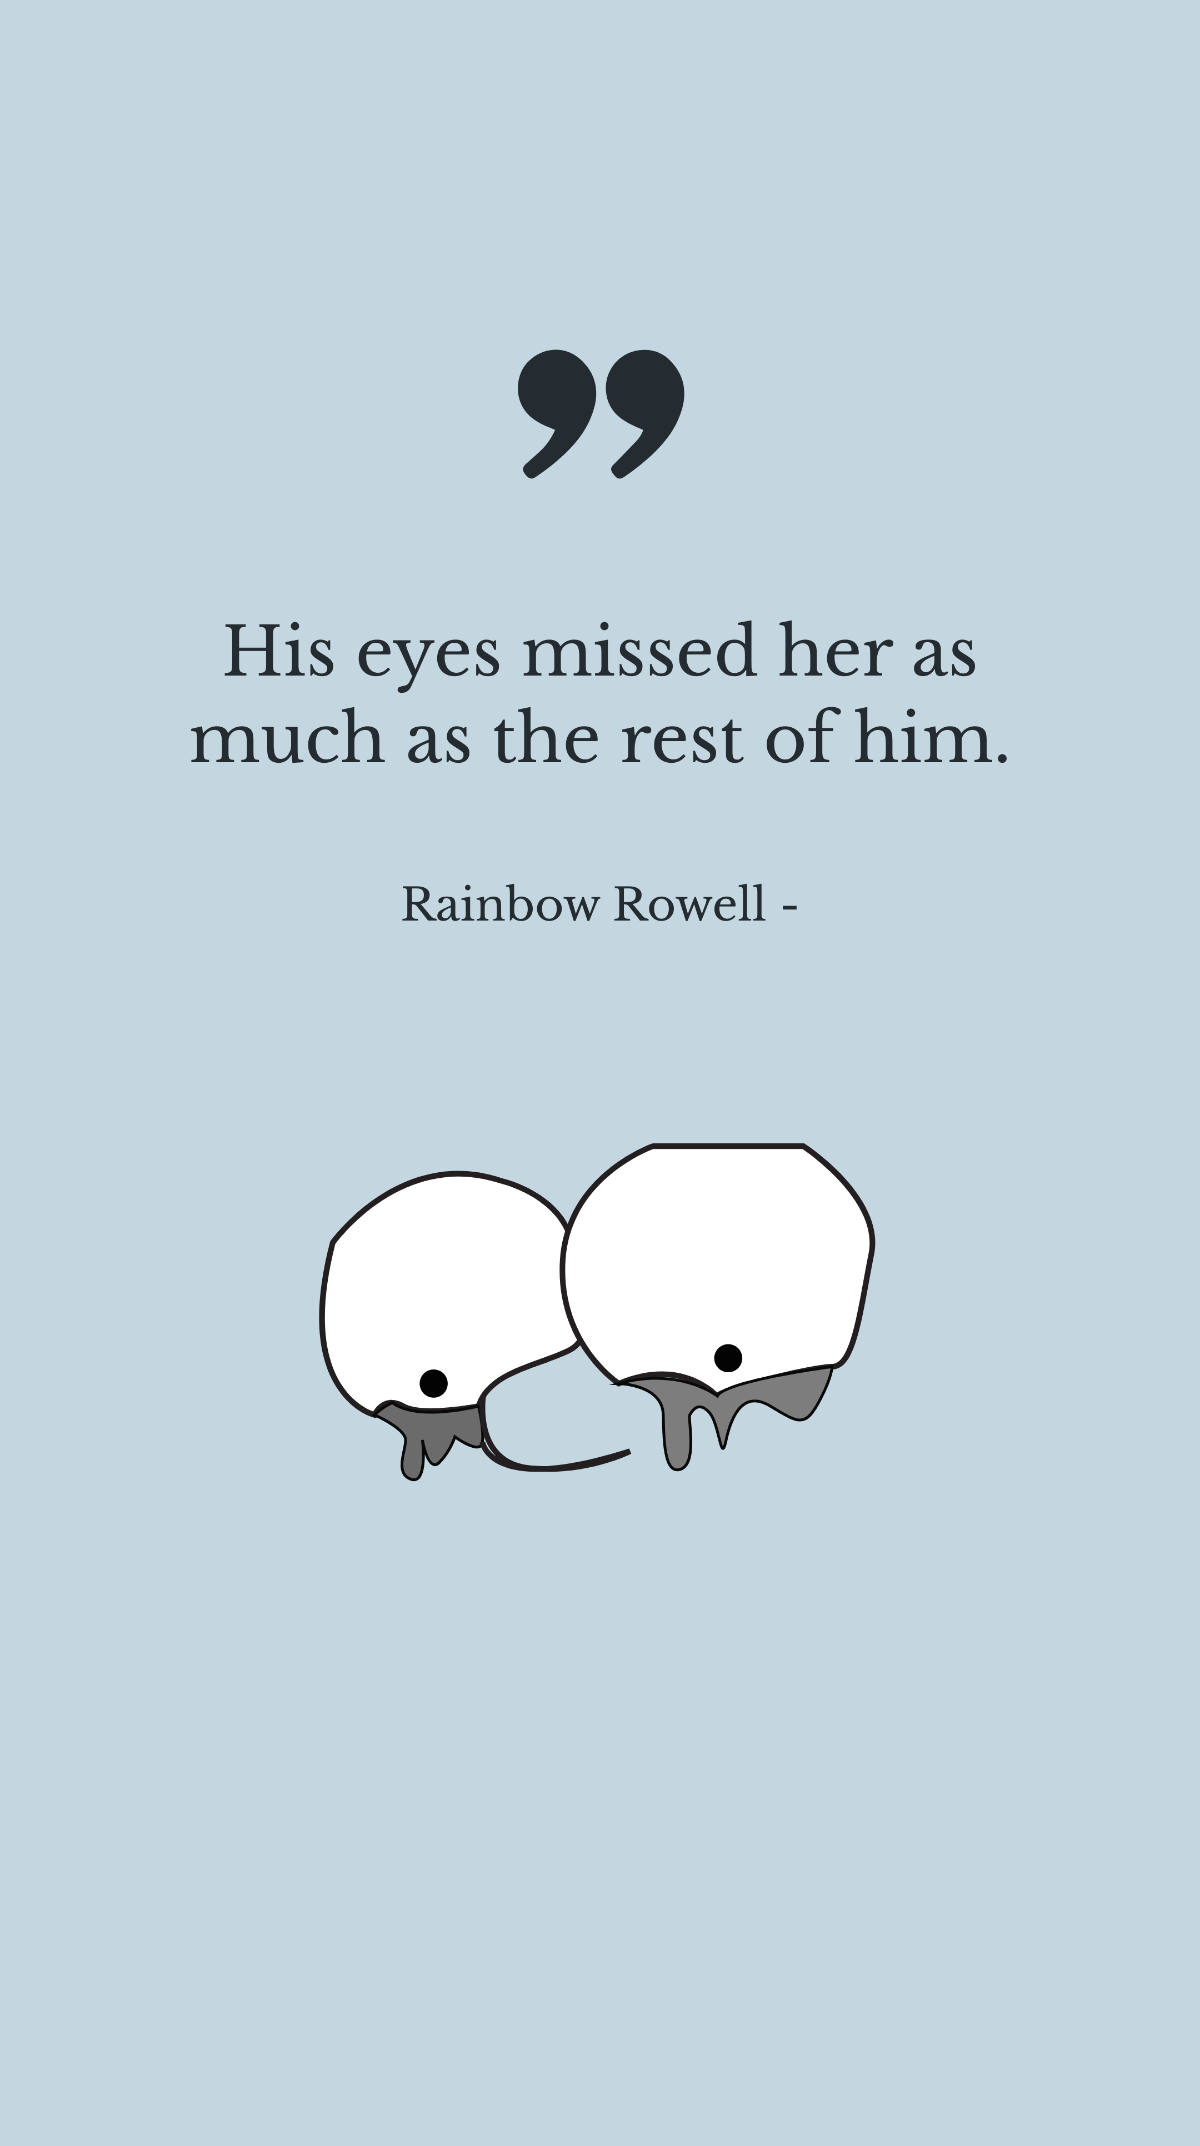 Free Rainbow Rowell - His eyes missed her as much as the rest of him. Template